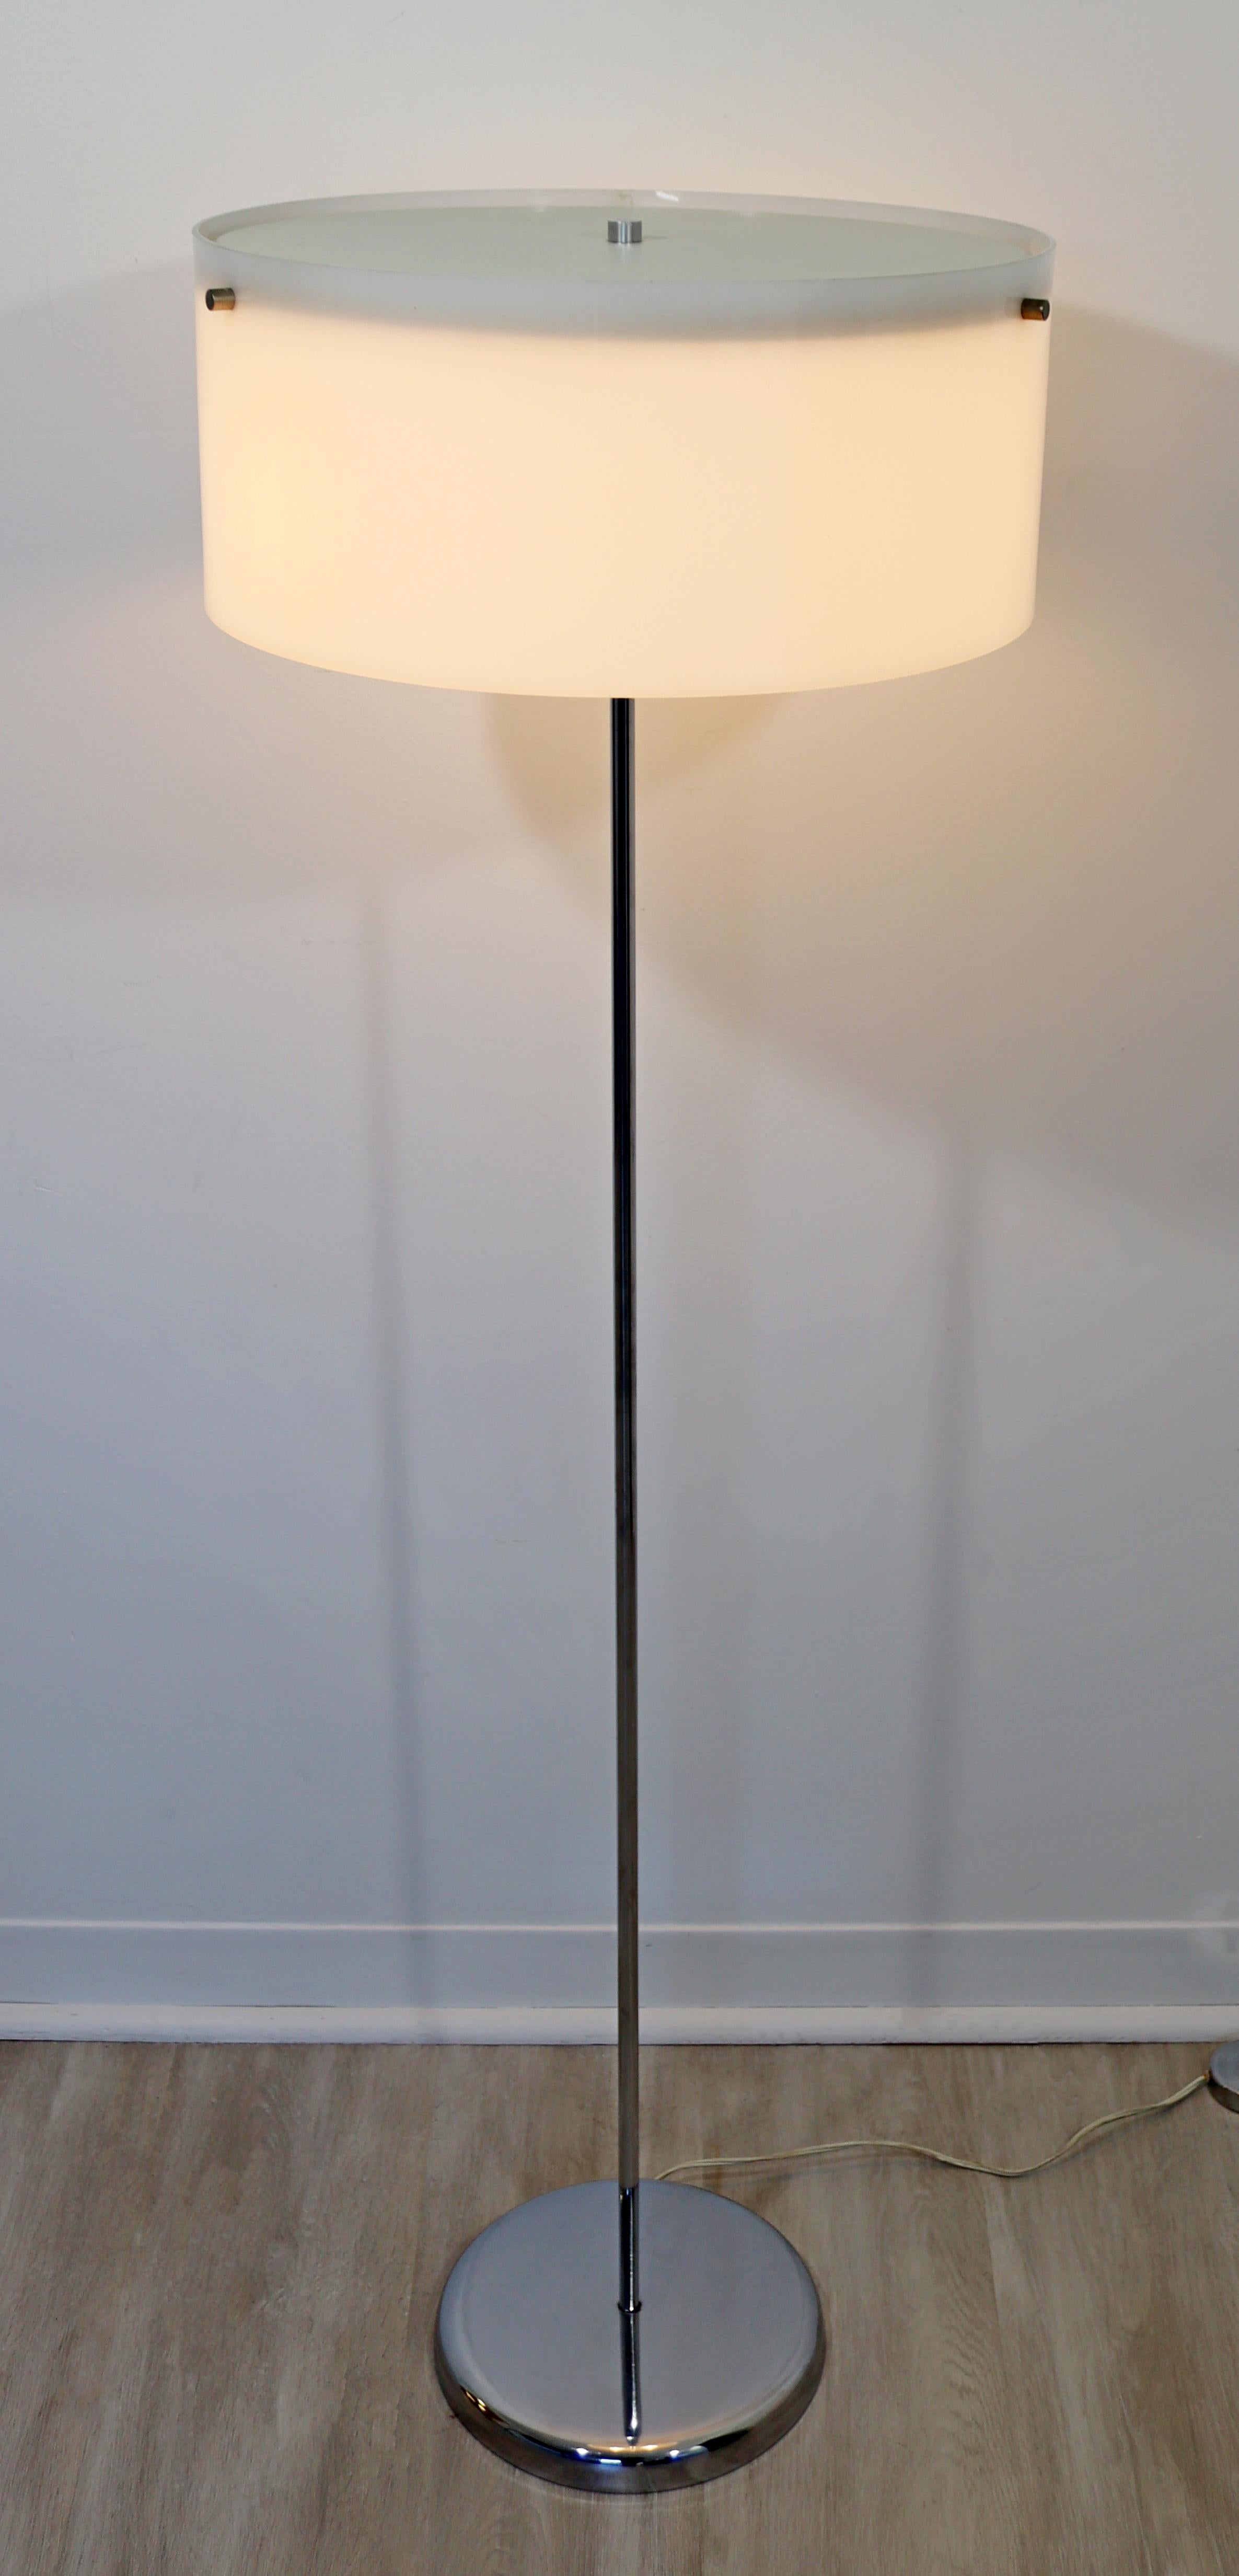 For your consideration is a stupendous, frosted acrylic on chrome floor lamp, attributed to Paul Mayen, circa the 1970s. In excellent vintage condition. The dimensions are 16